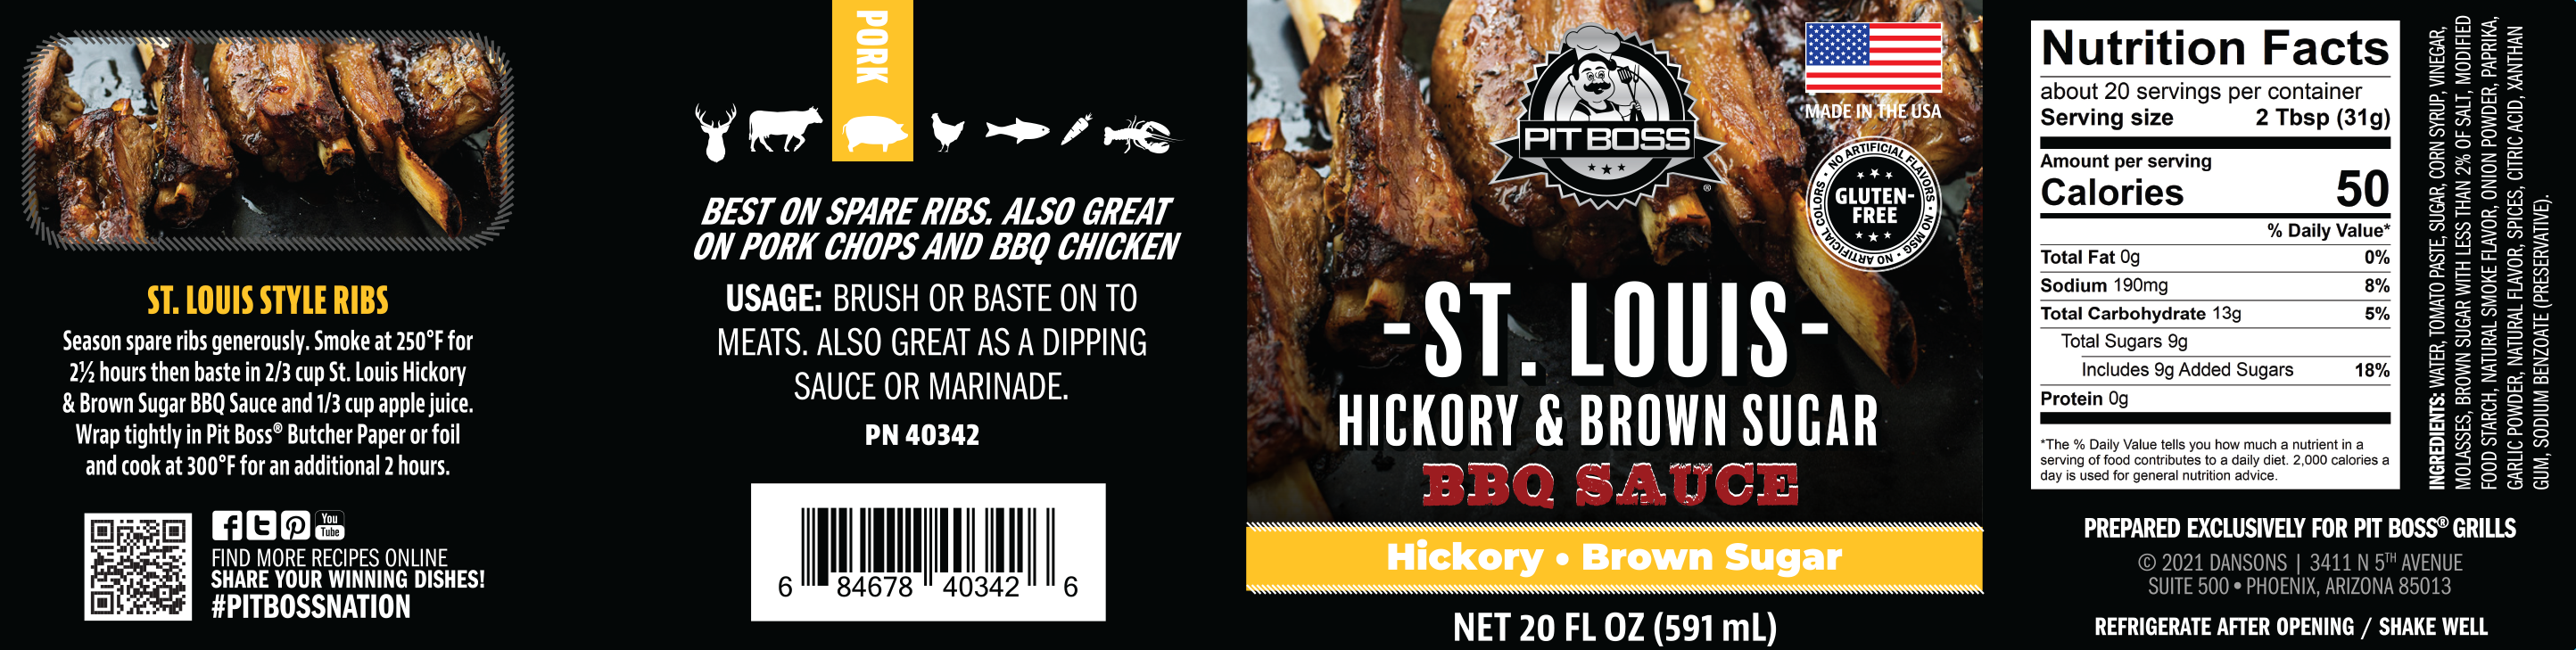 Pit Boss St. Louis Hickory & Brown Sugar BBQ Sauce - 20 oz. - image 2 of 3